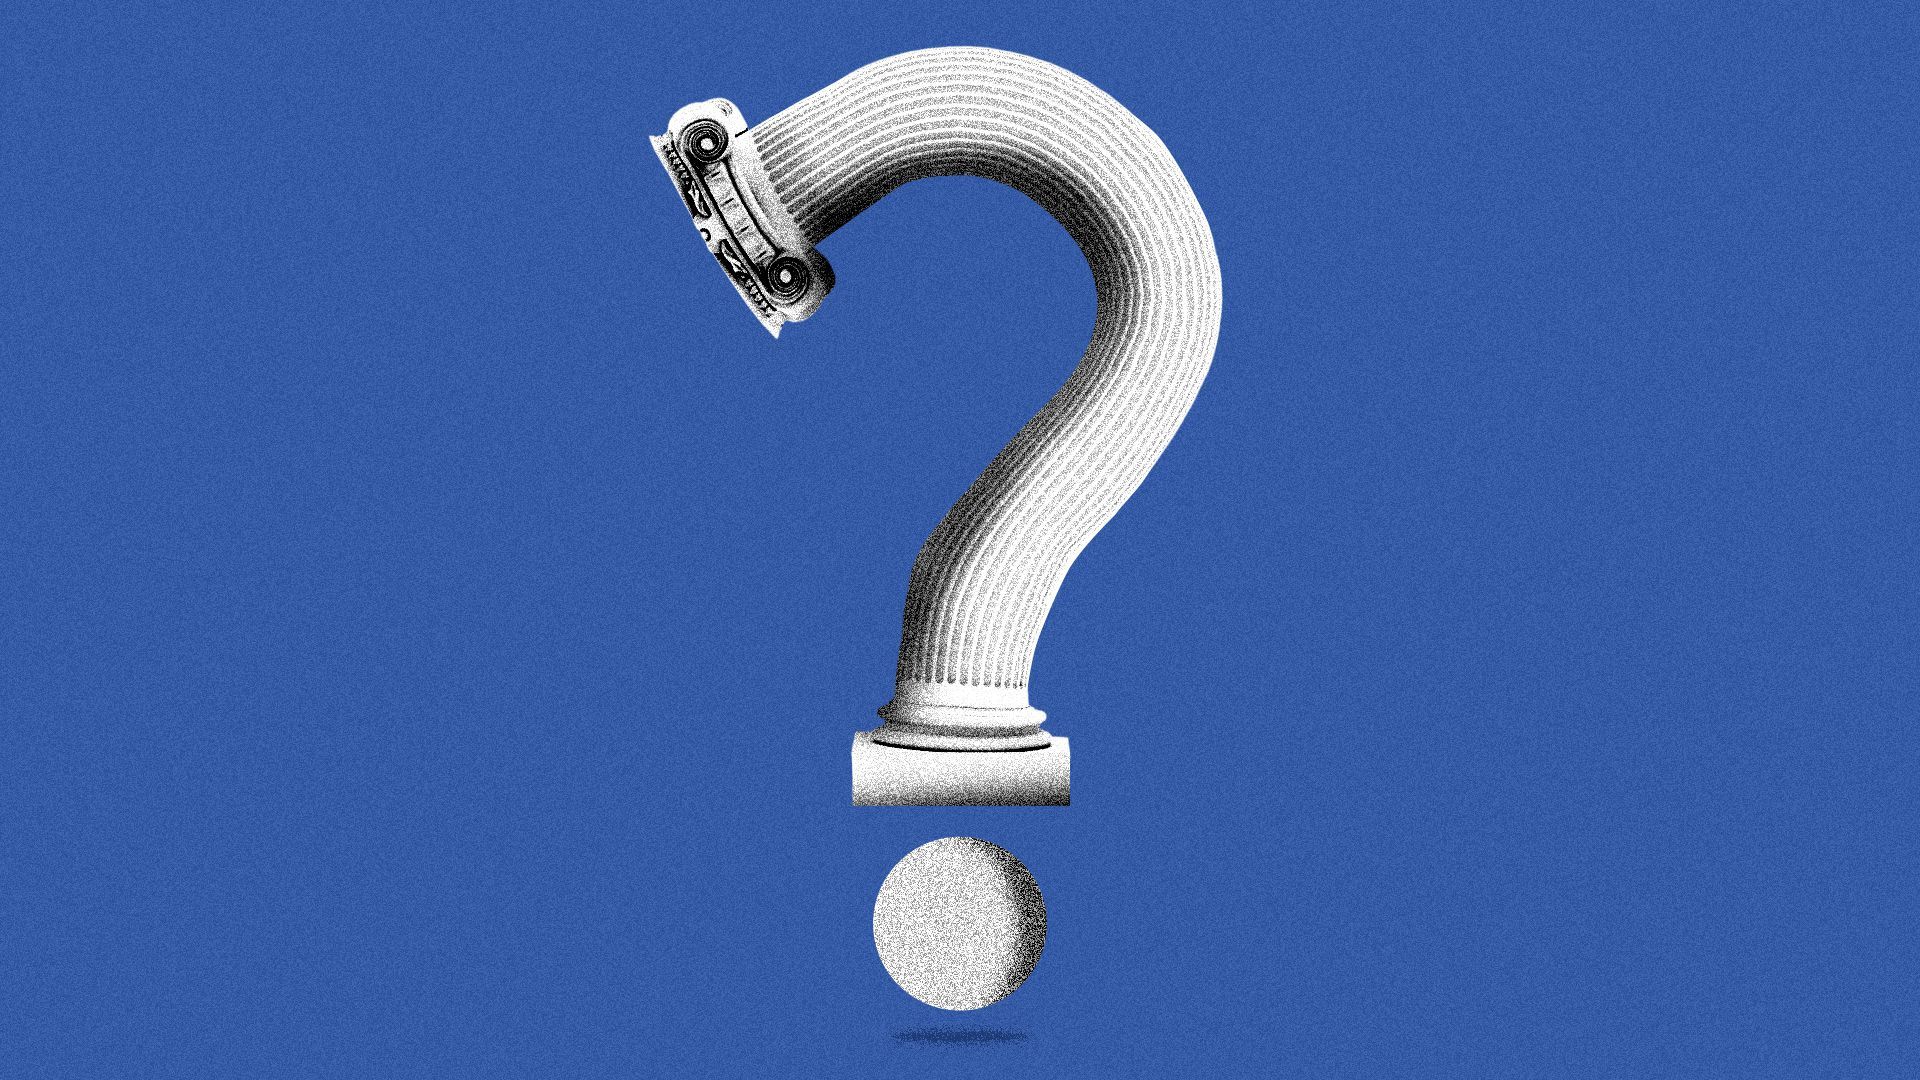 Illustration of a pillar or column in the shape of a question mark.